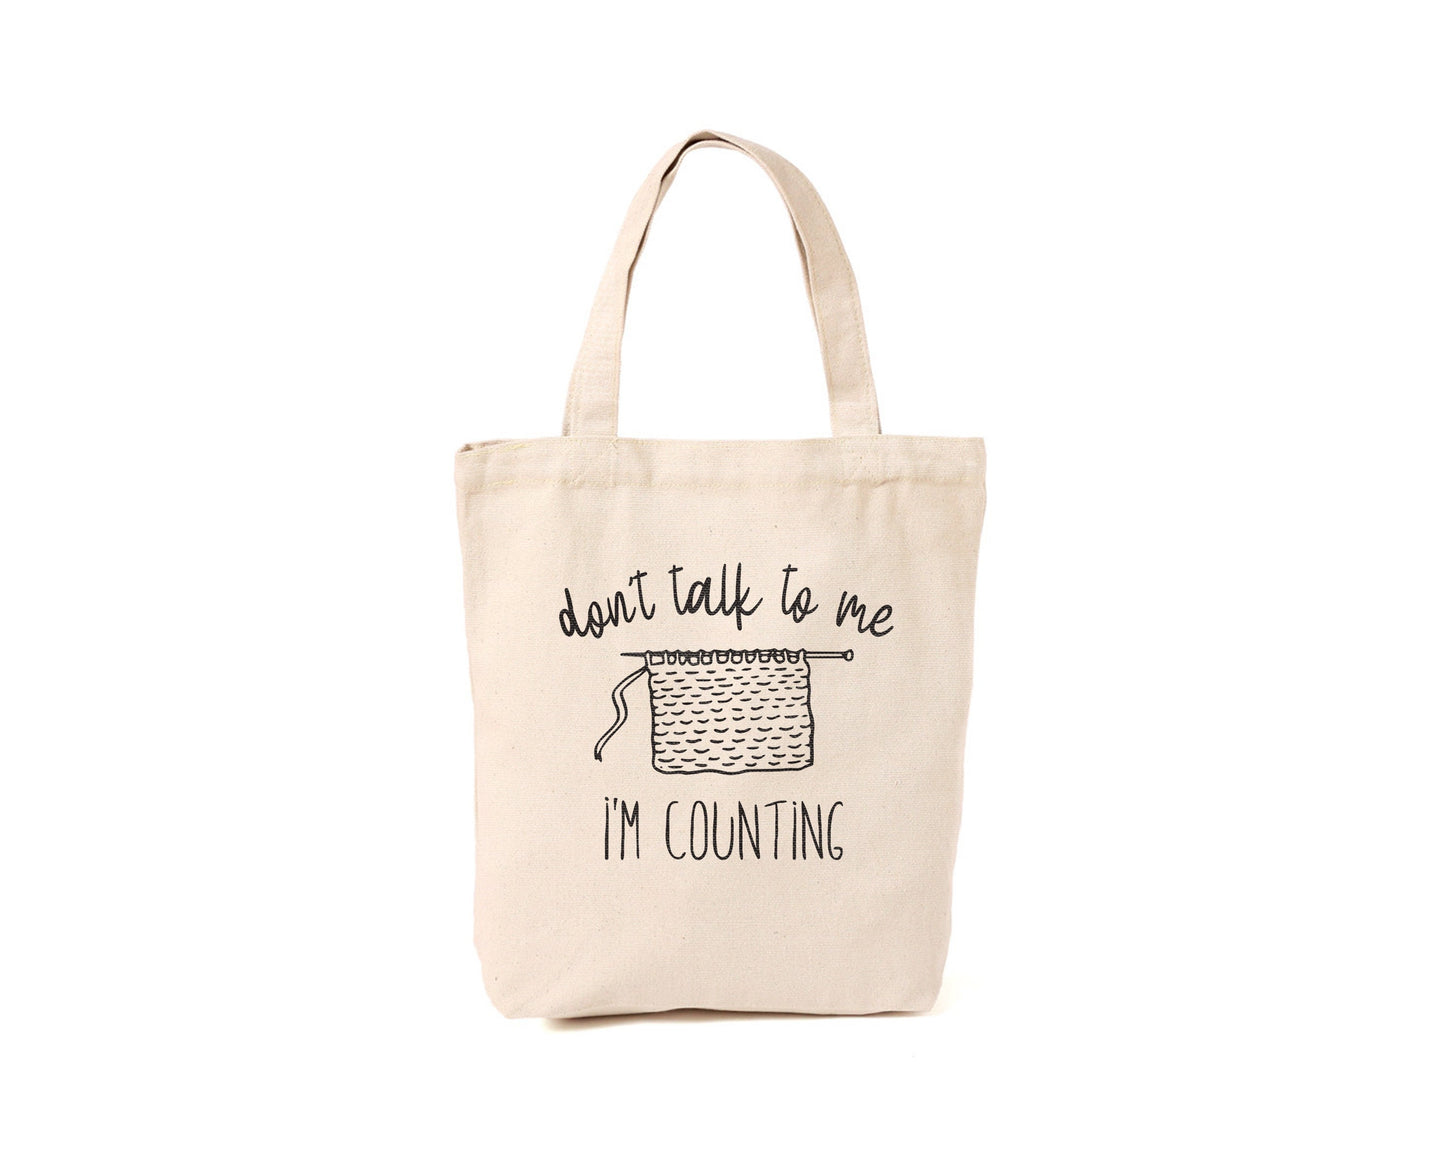 I'm Counting Tote Bag